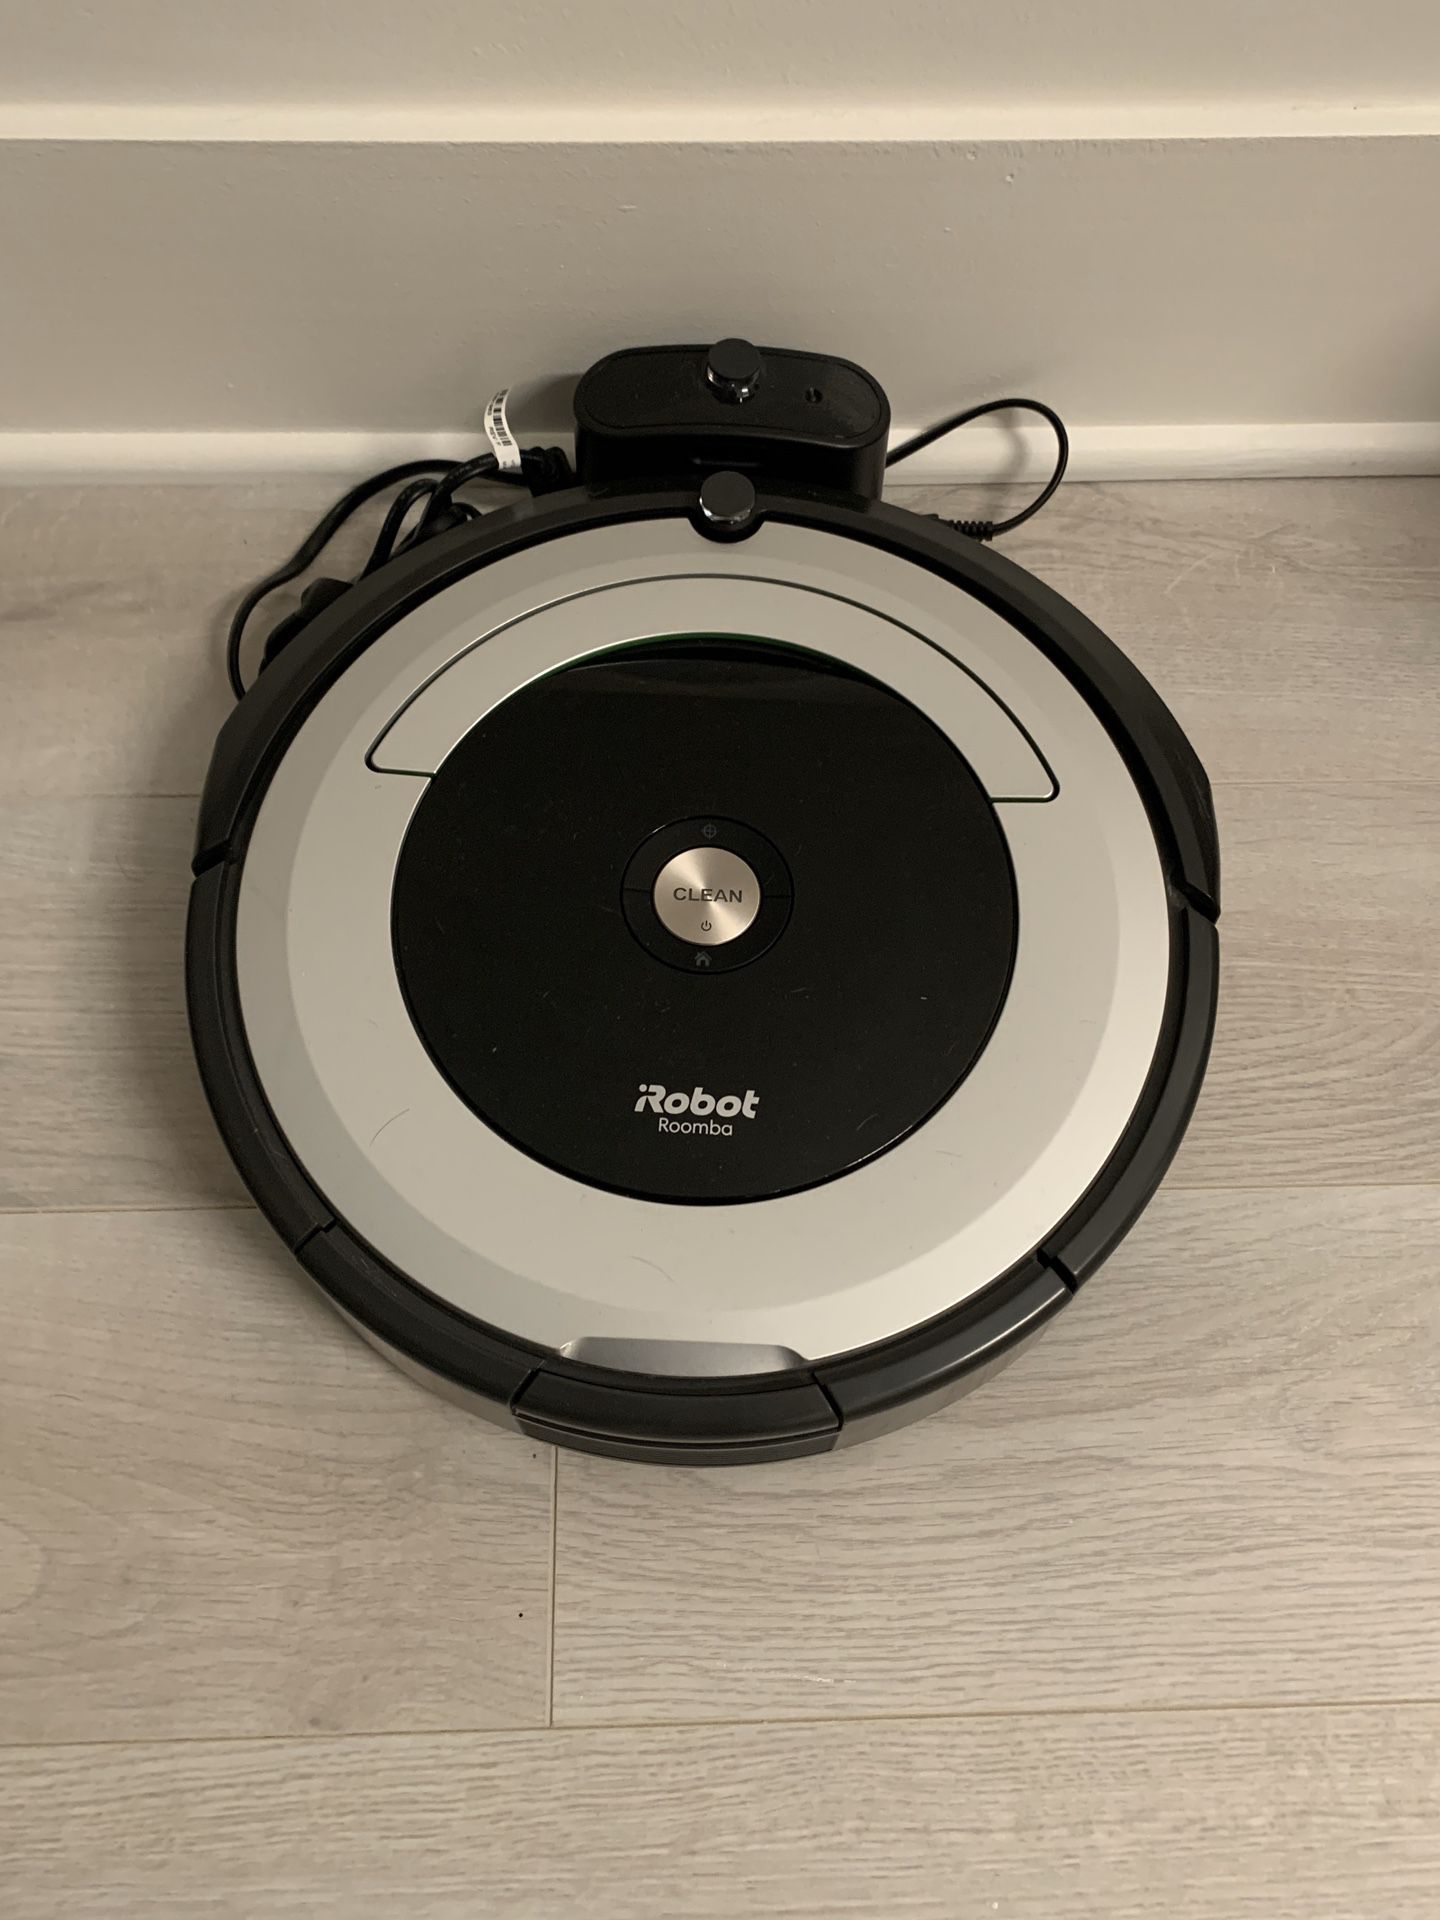 iRobot Roomba 690 Wi-Fi and Phone App Controlled